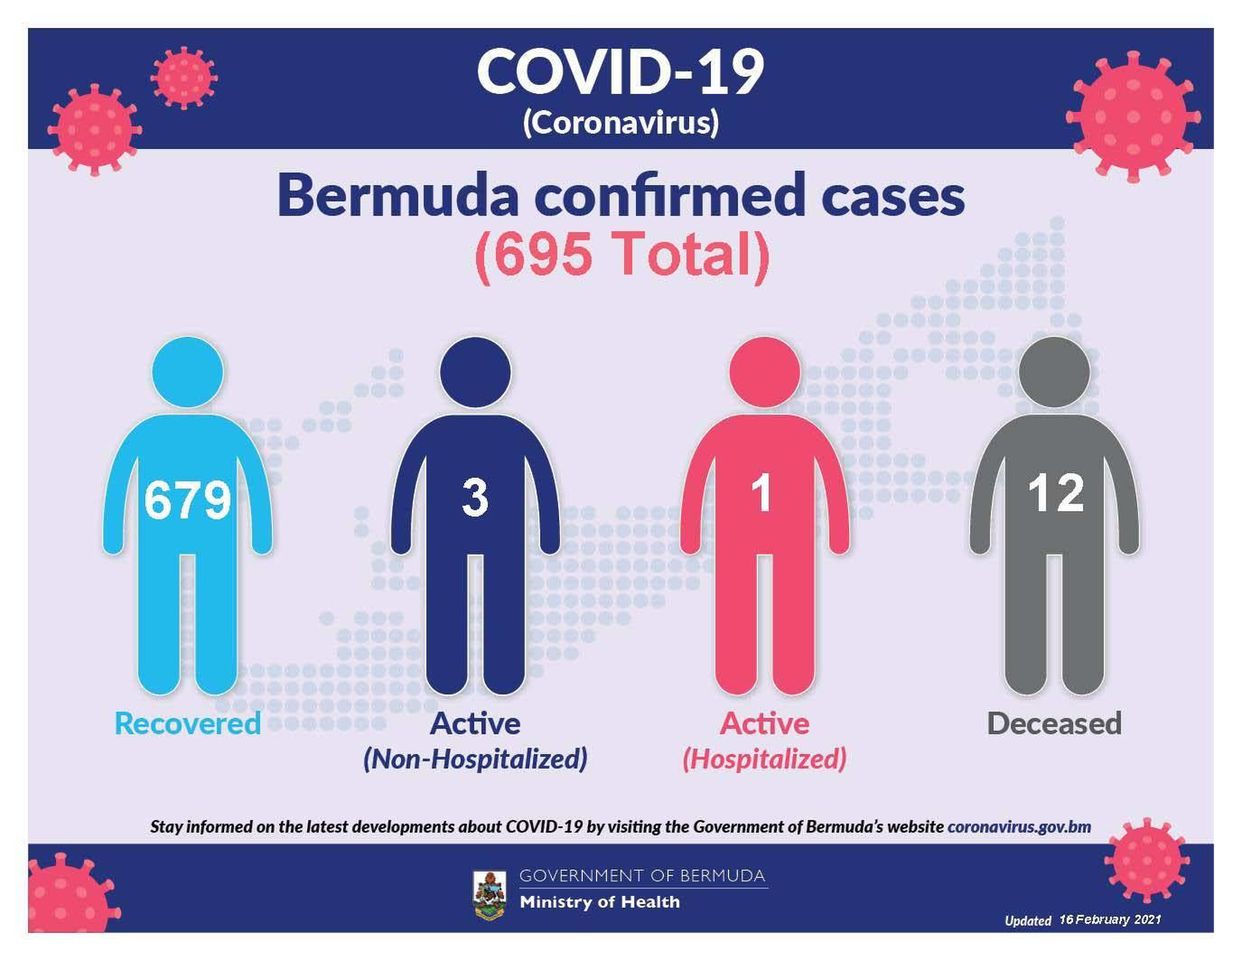 No new COVID-19 cases reported, 15% of the Bermuda population have received one dose of vaccine